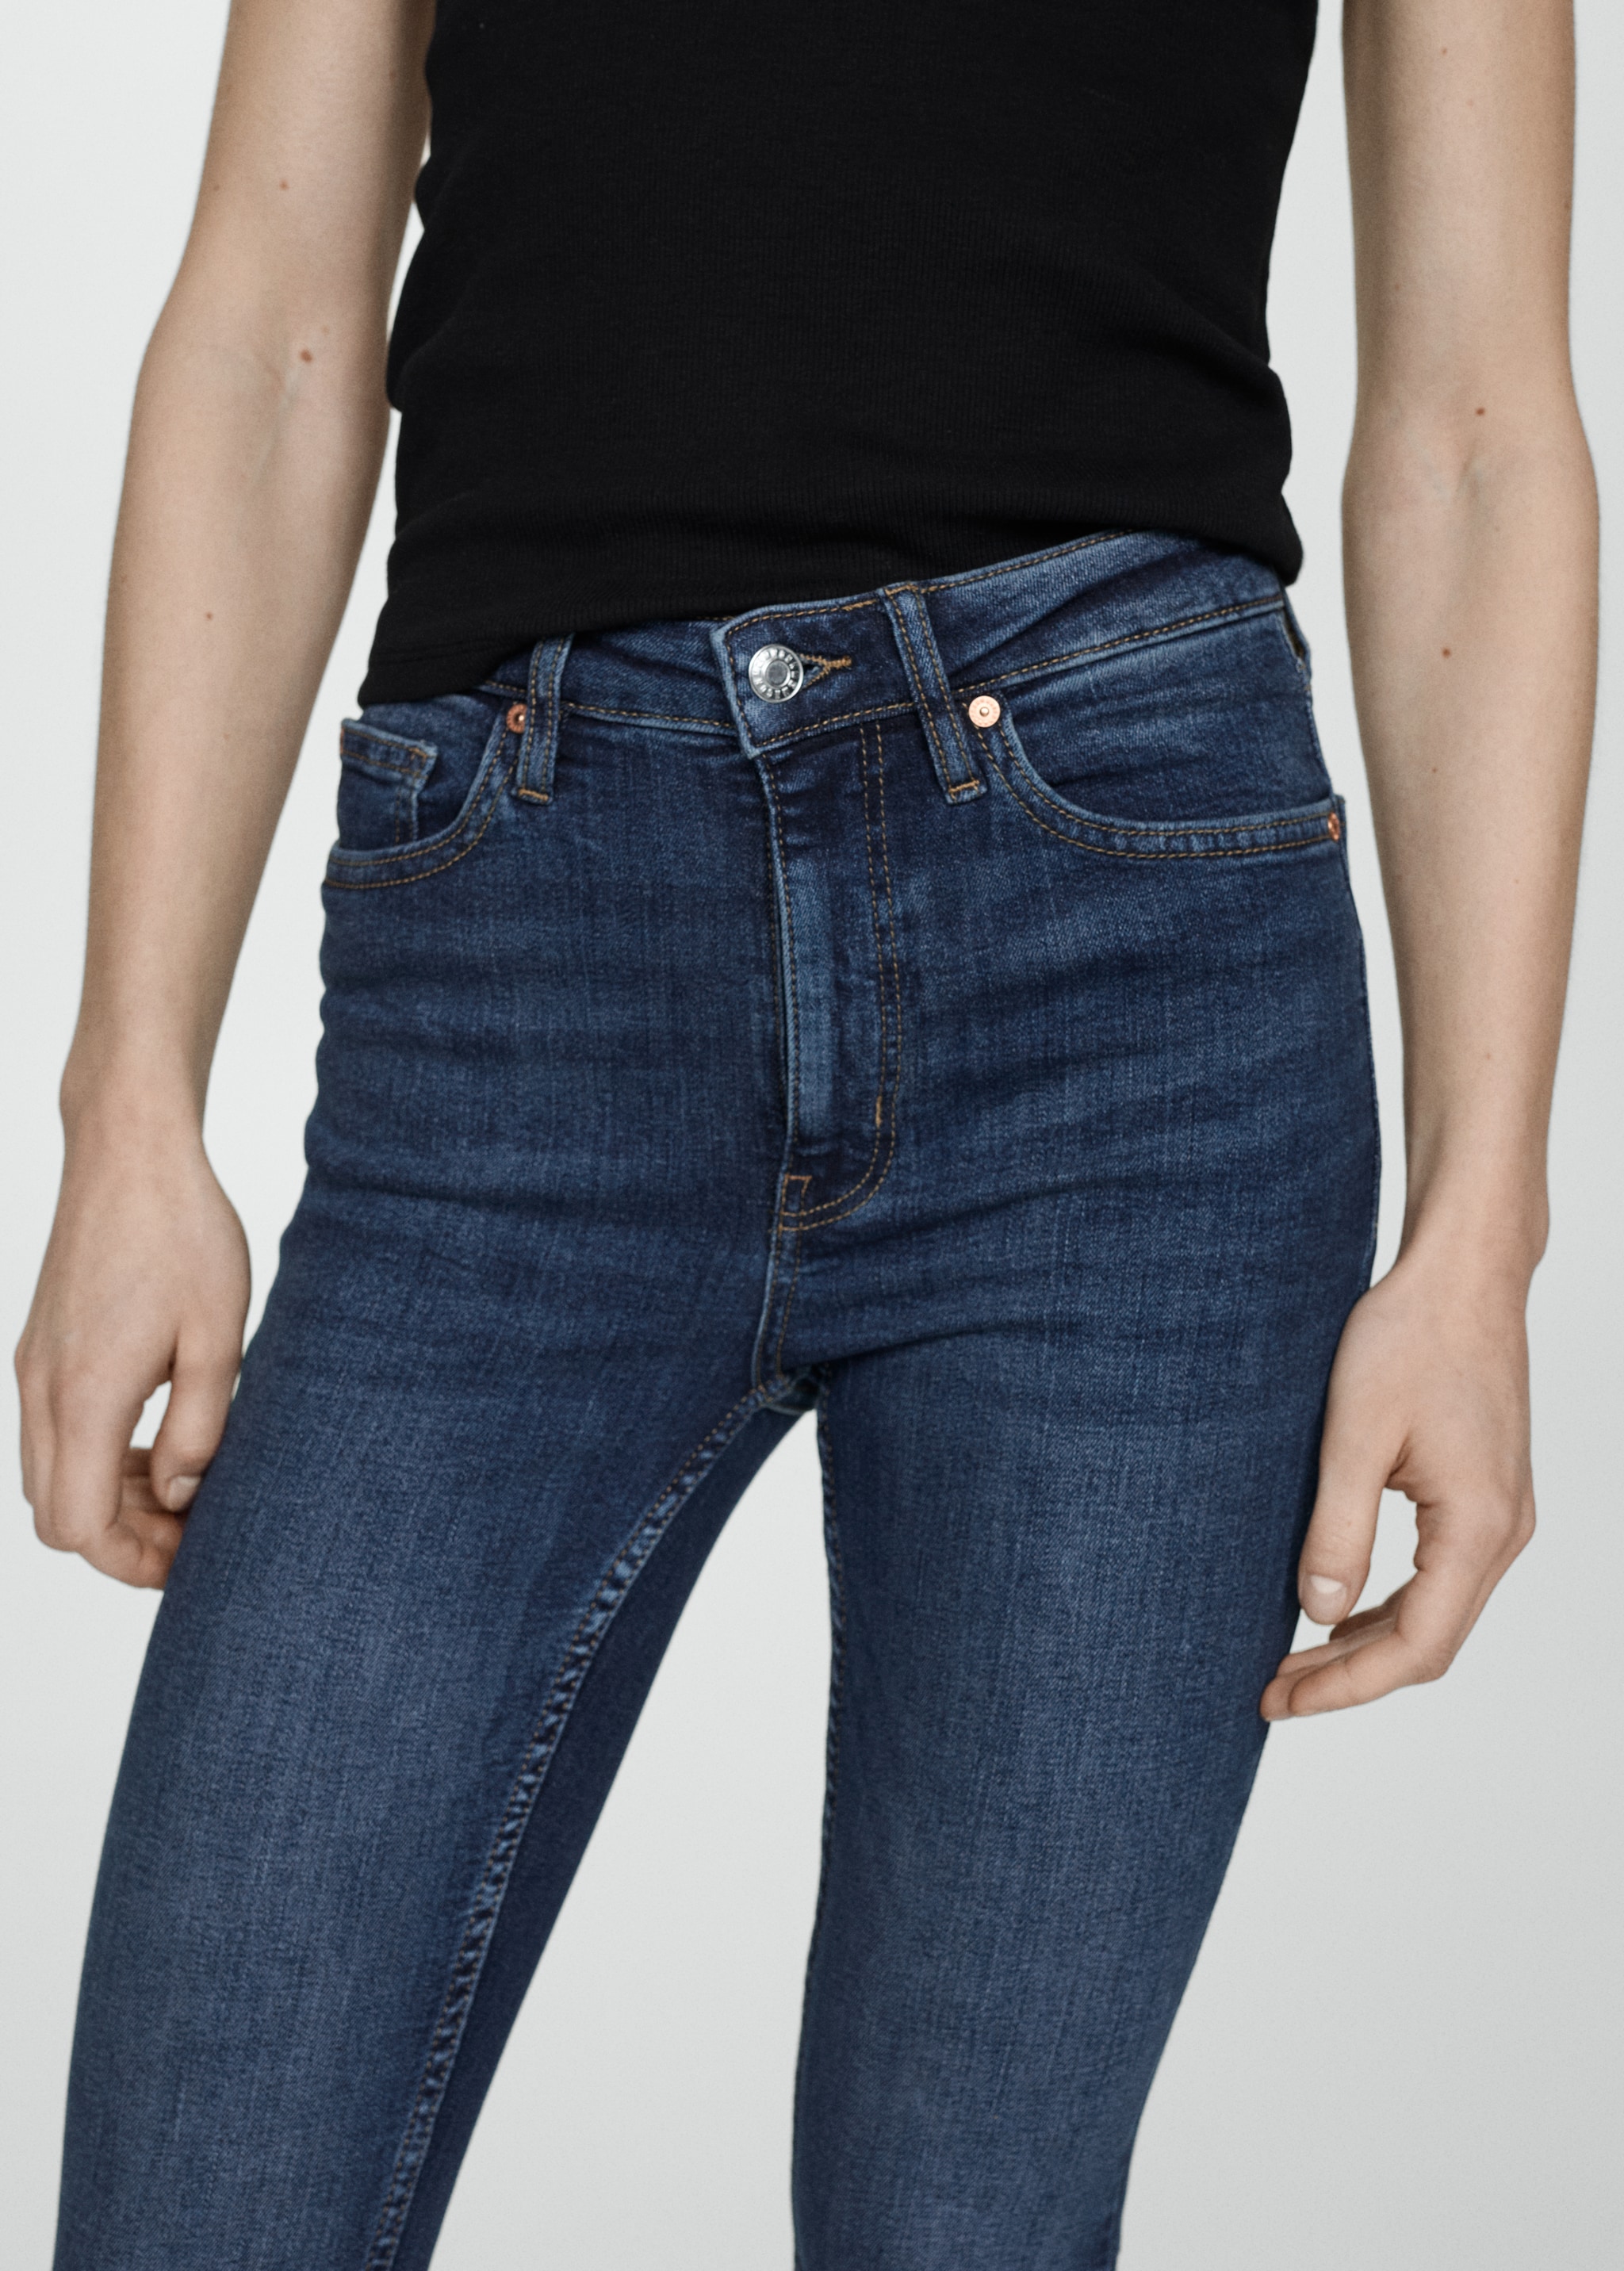 High-rise skinny jeans - Details of the article 6